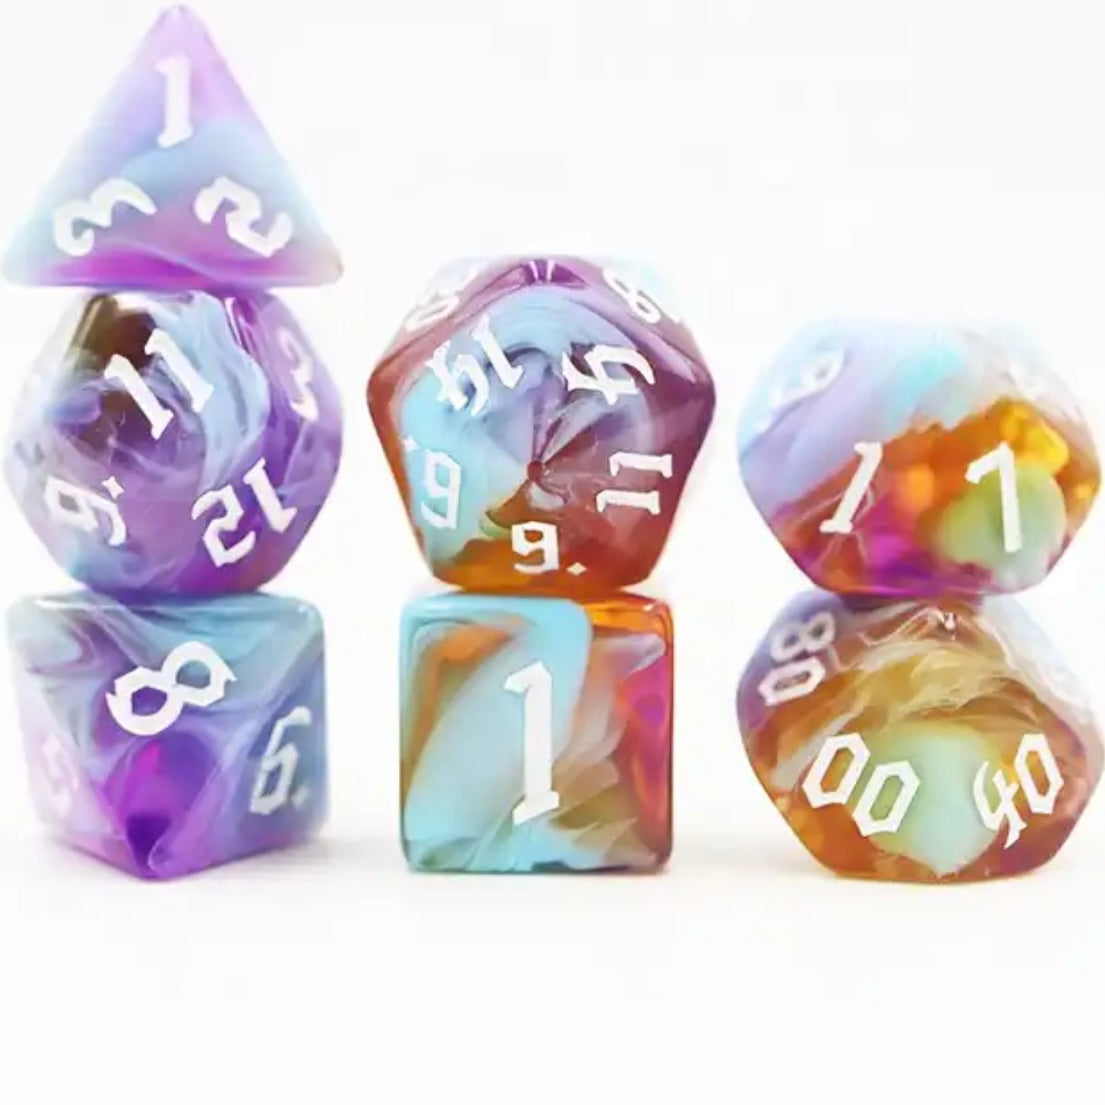 DND dice set for TTRPG, role playing games for dice goblins and D&D from a UK dice store